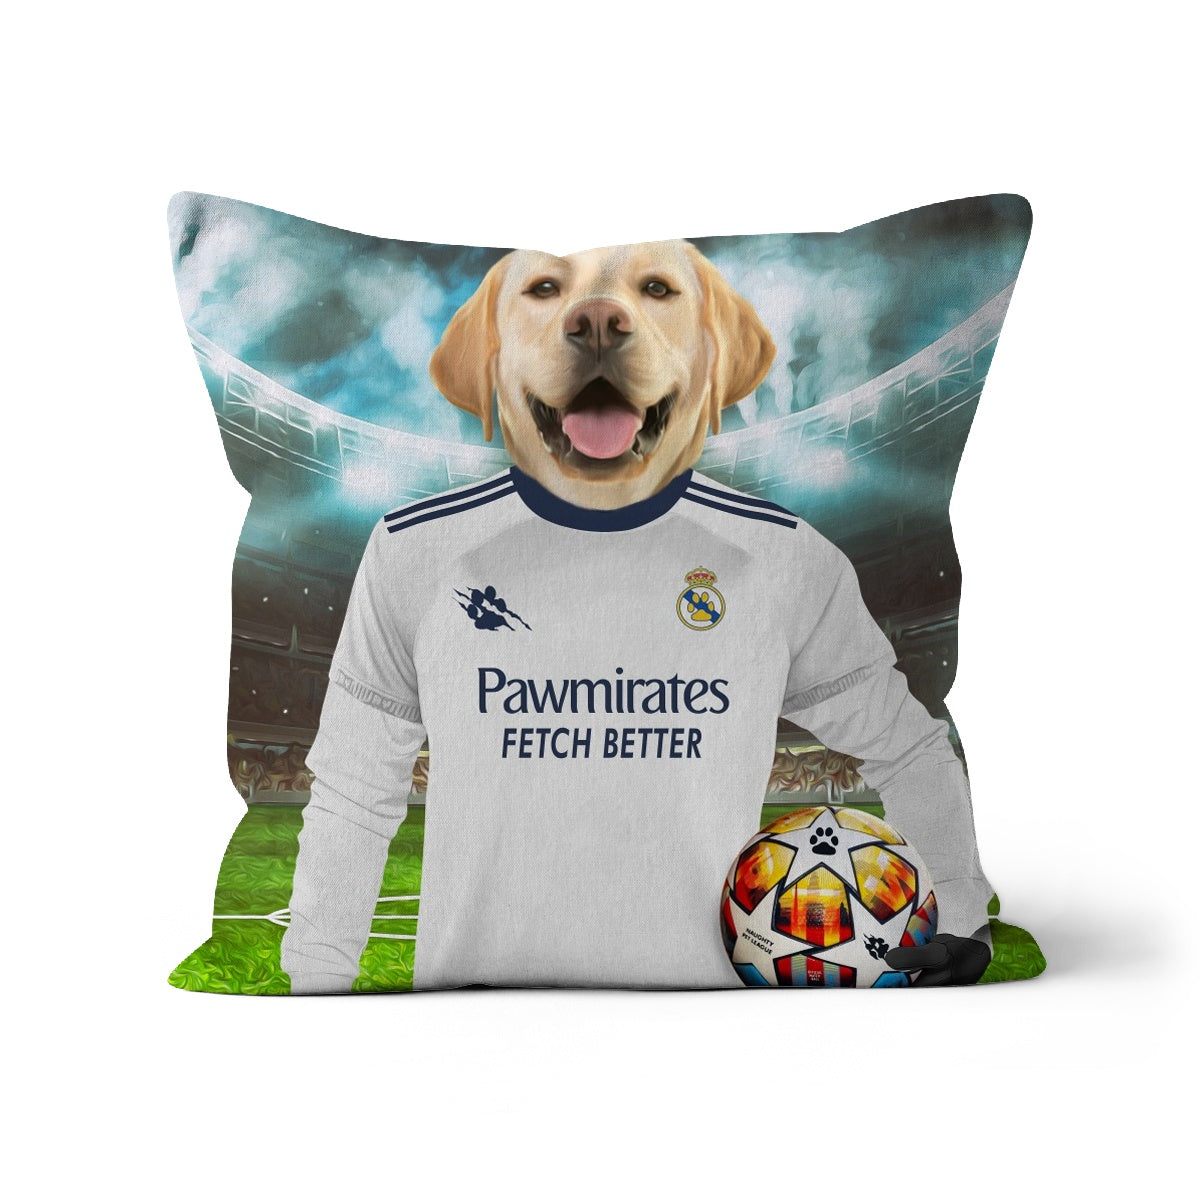 Real Pawdrid Football Club Paw & Glory, paw and glory,  dog pillow custom, personalised pet pillow, pillow custom, print pillows, Pet Portraits cushions